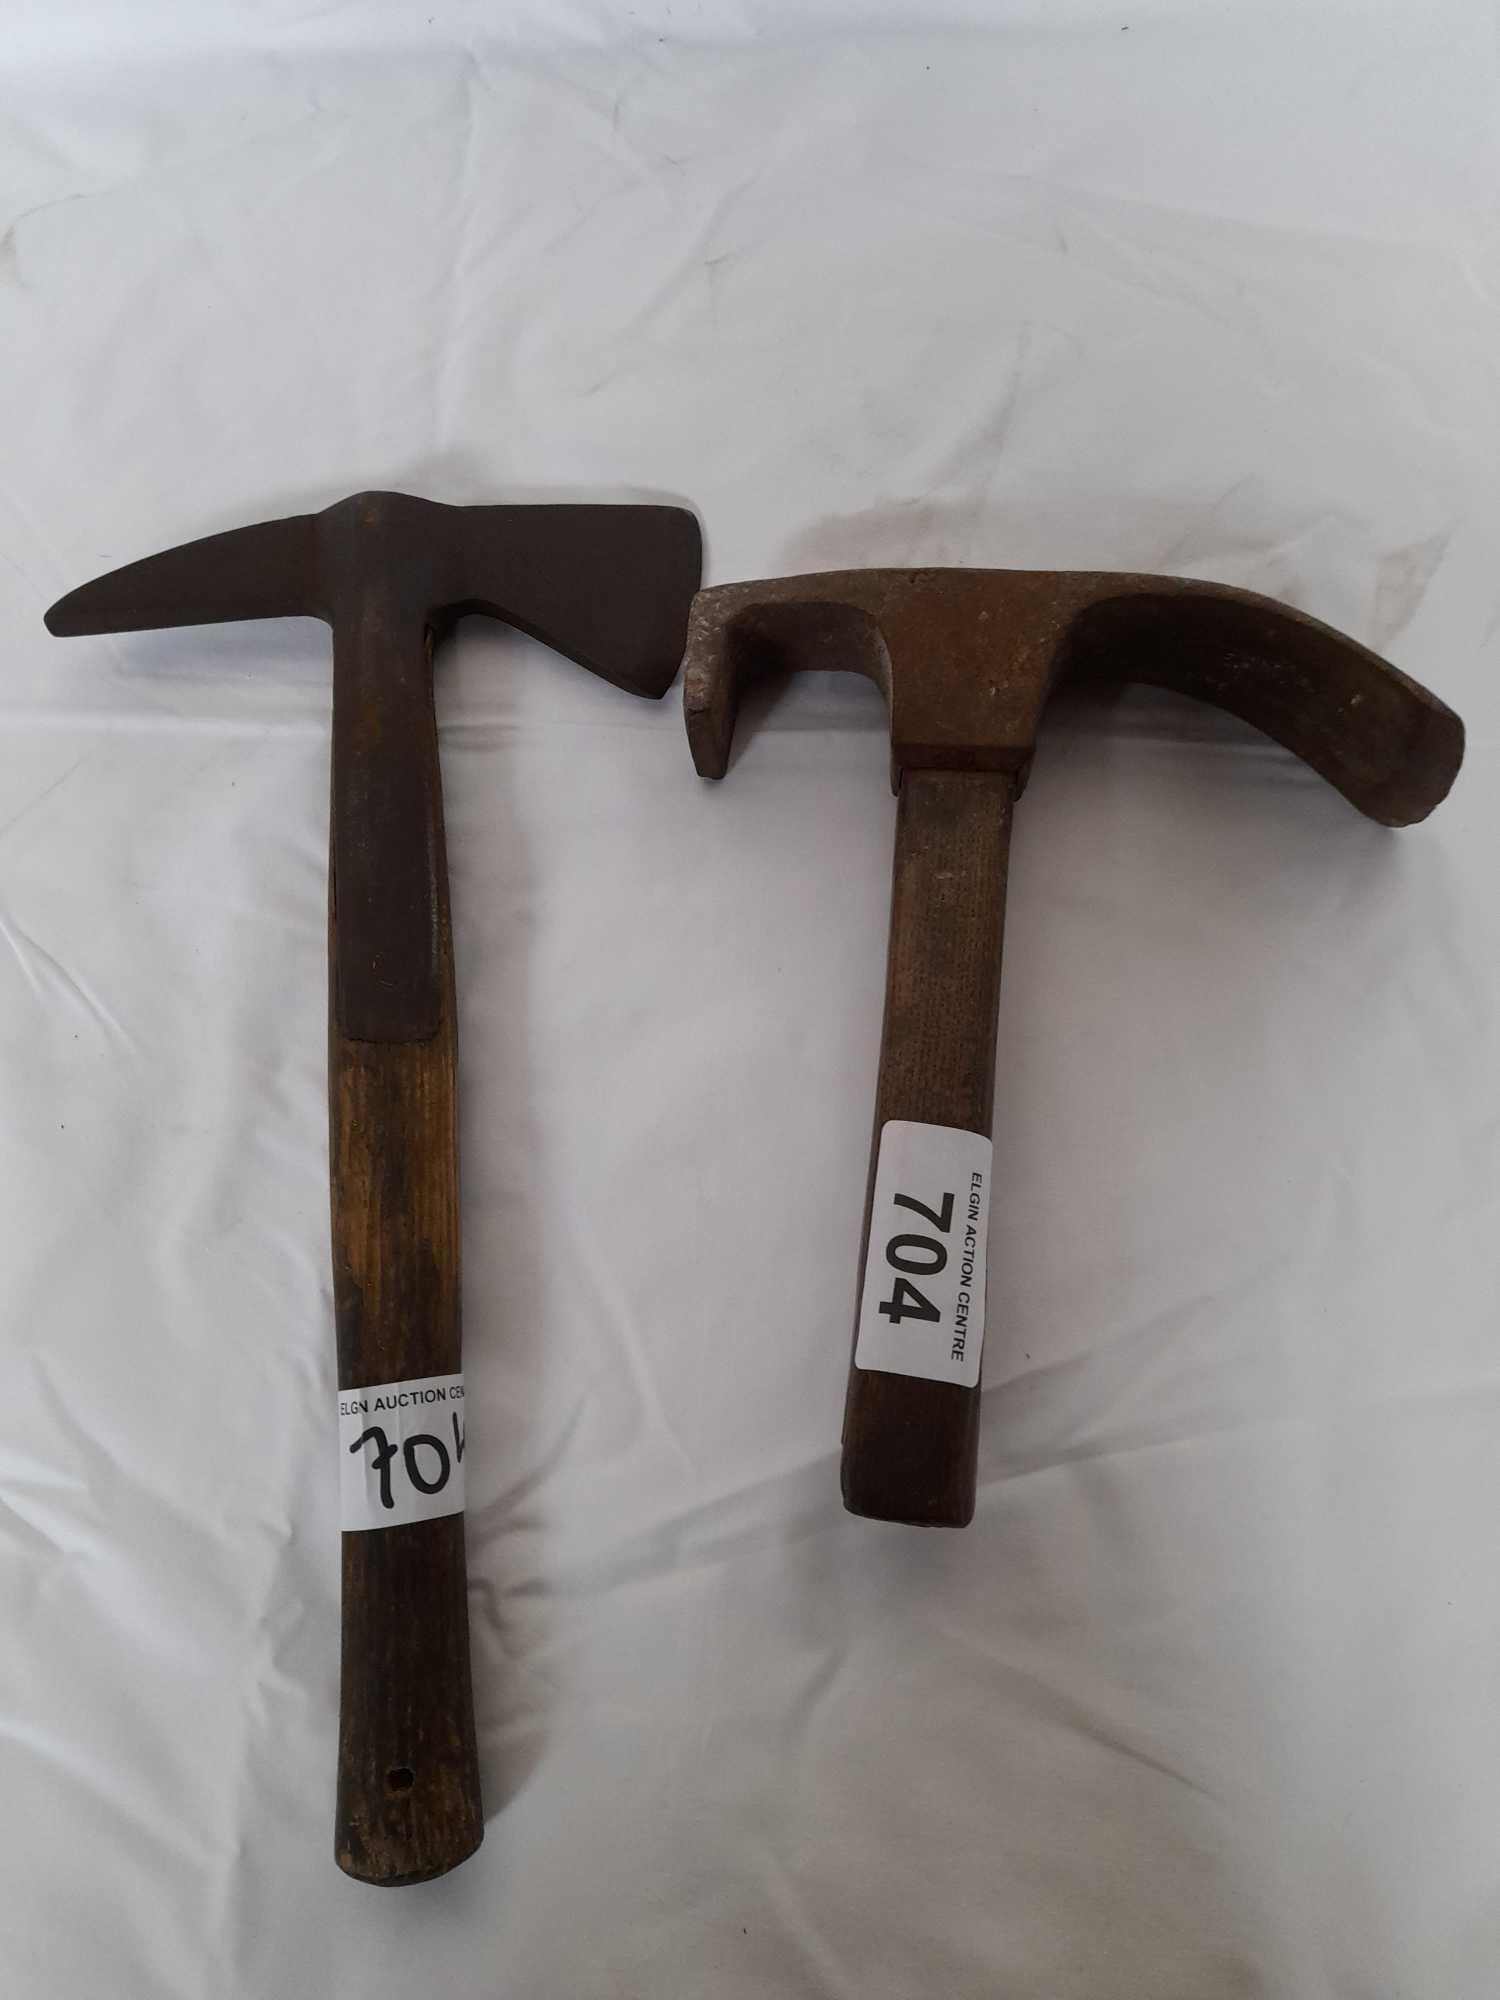 FIREMANS AXE & COOPERS TOOL - Image 2 of 9